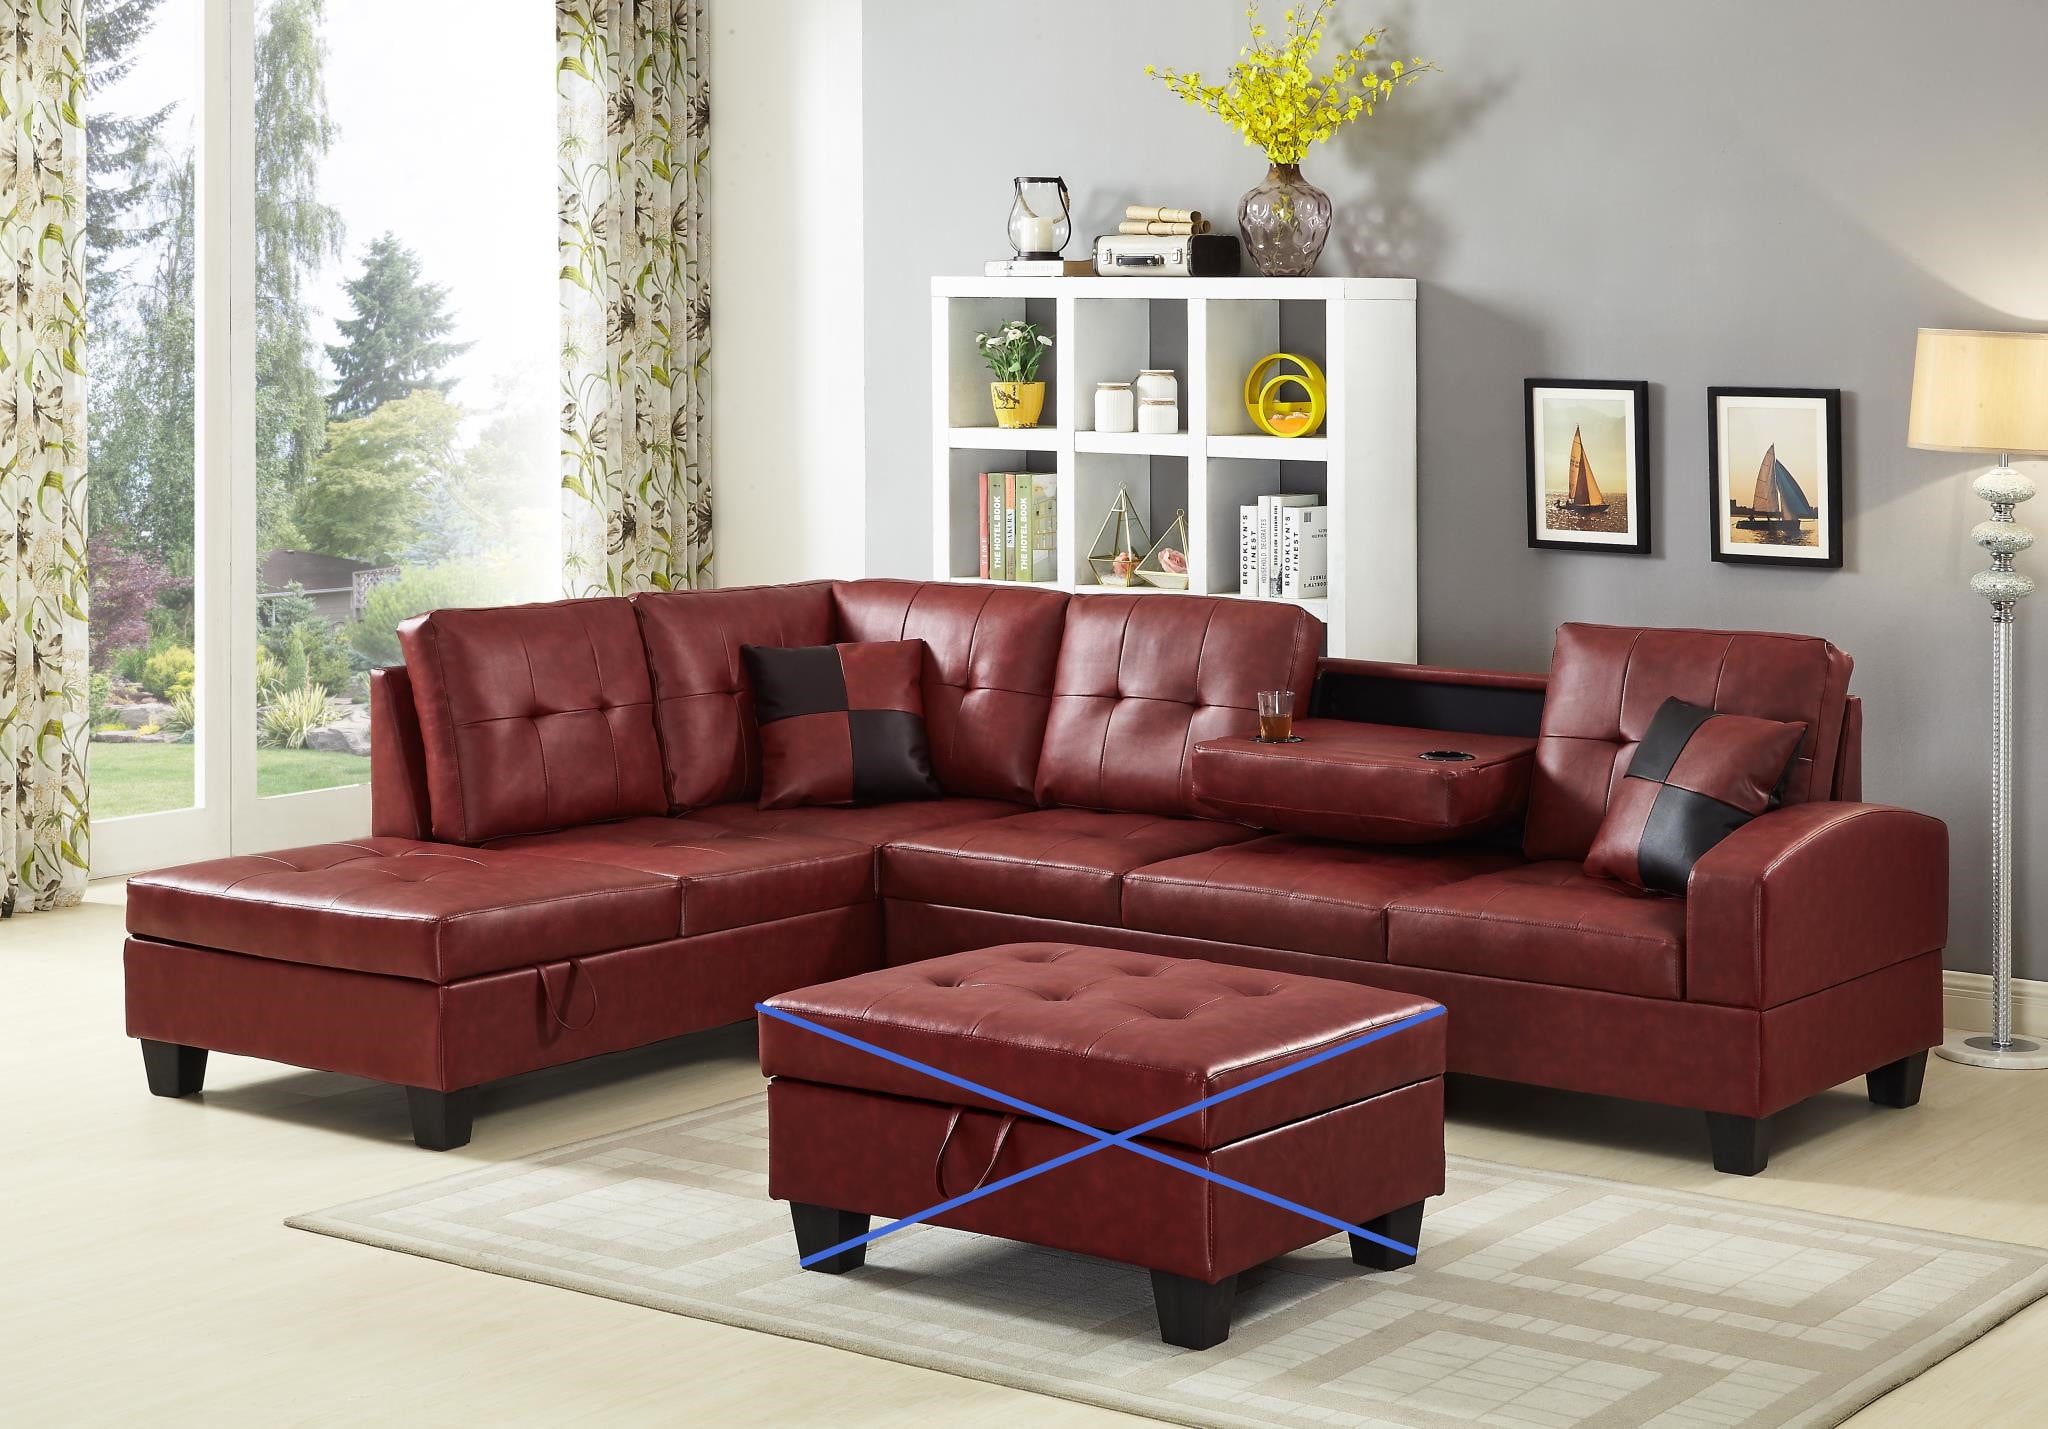 Star Home Living Red Faux Leather 3 Seater Left Facing Chaise Sectional Regarding Faux Leather Sectional Sofa Sets (View 20 of 21)